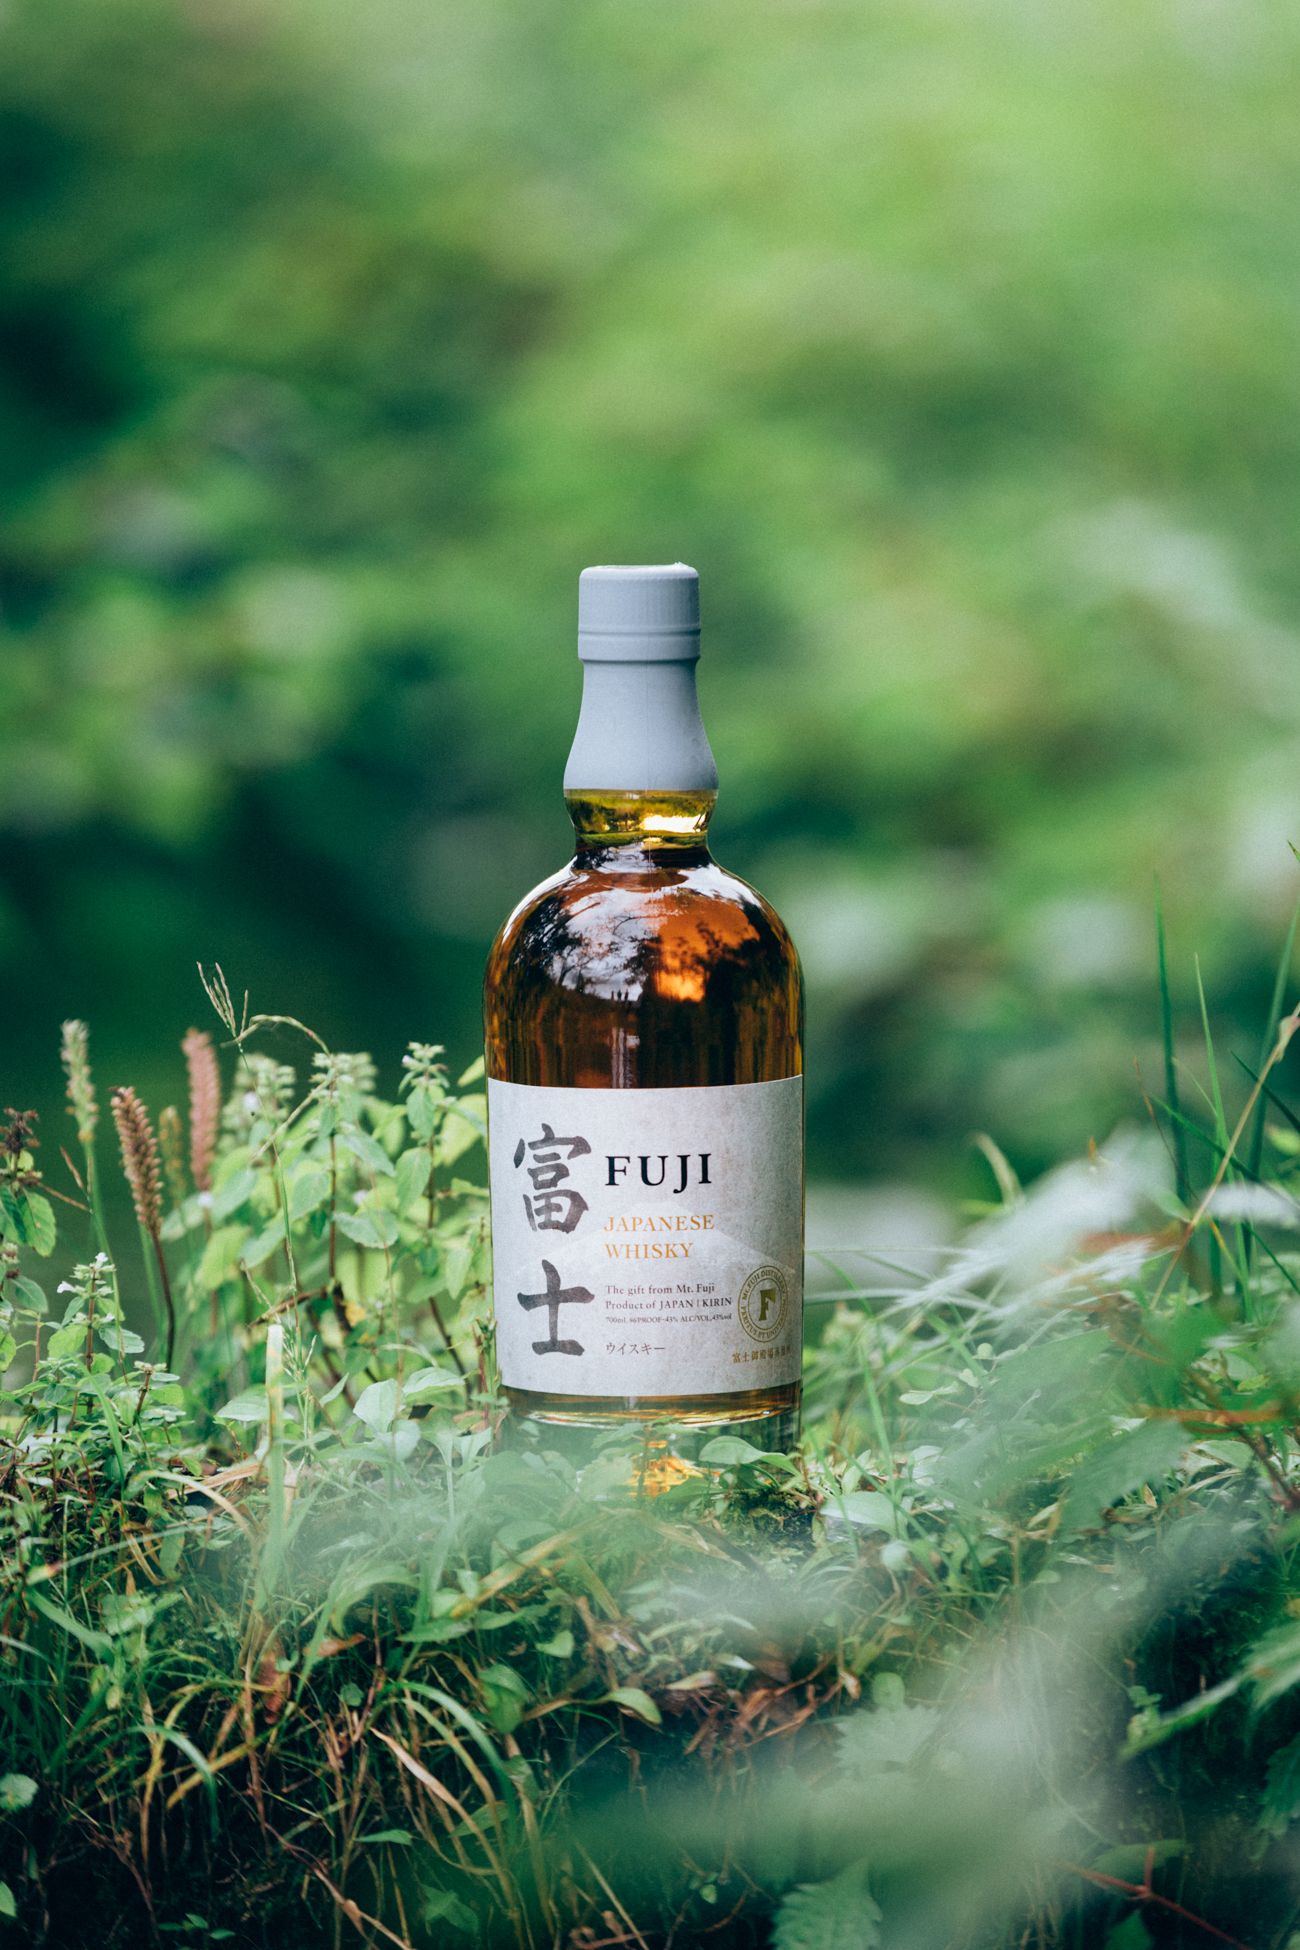 Fuji Whisky in nature